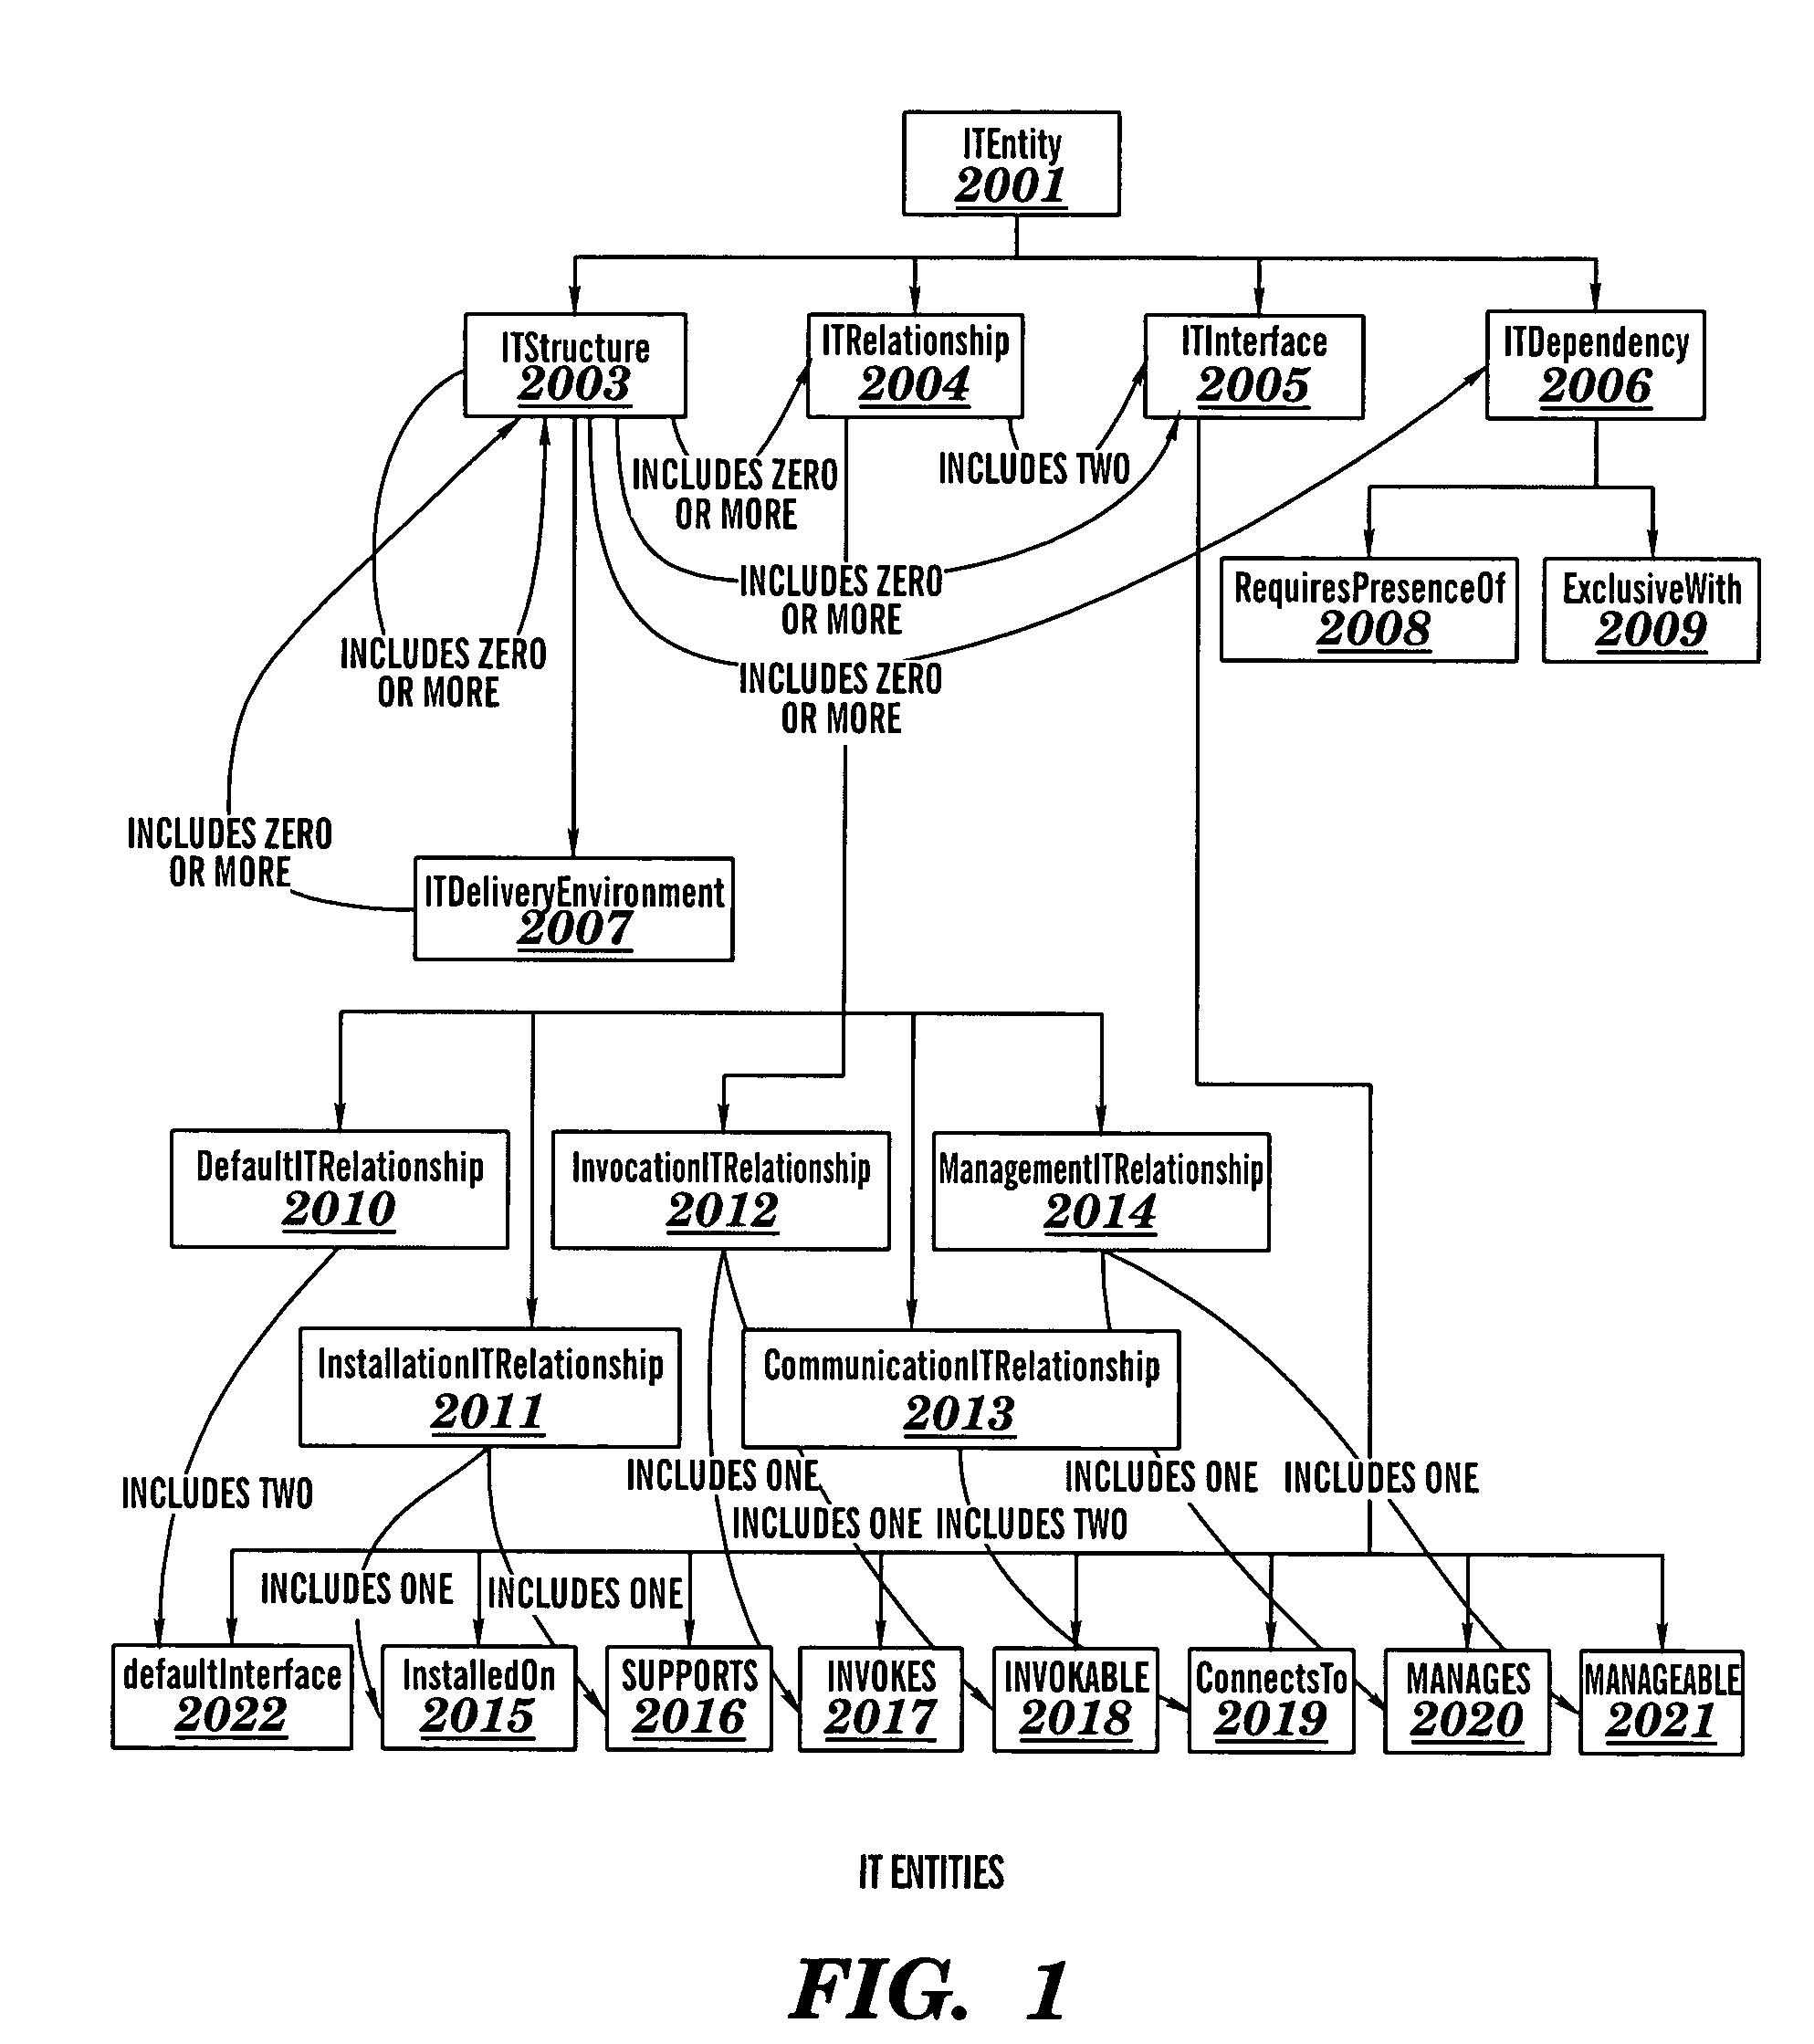 Automated display of an information technology system configuration